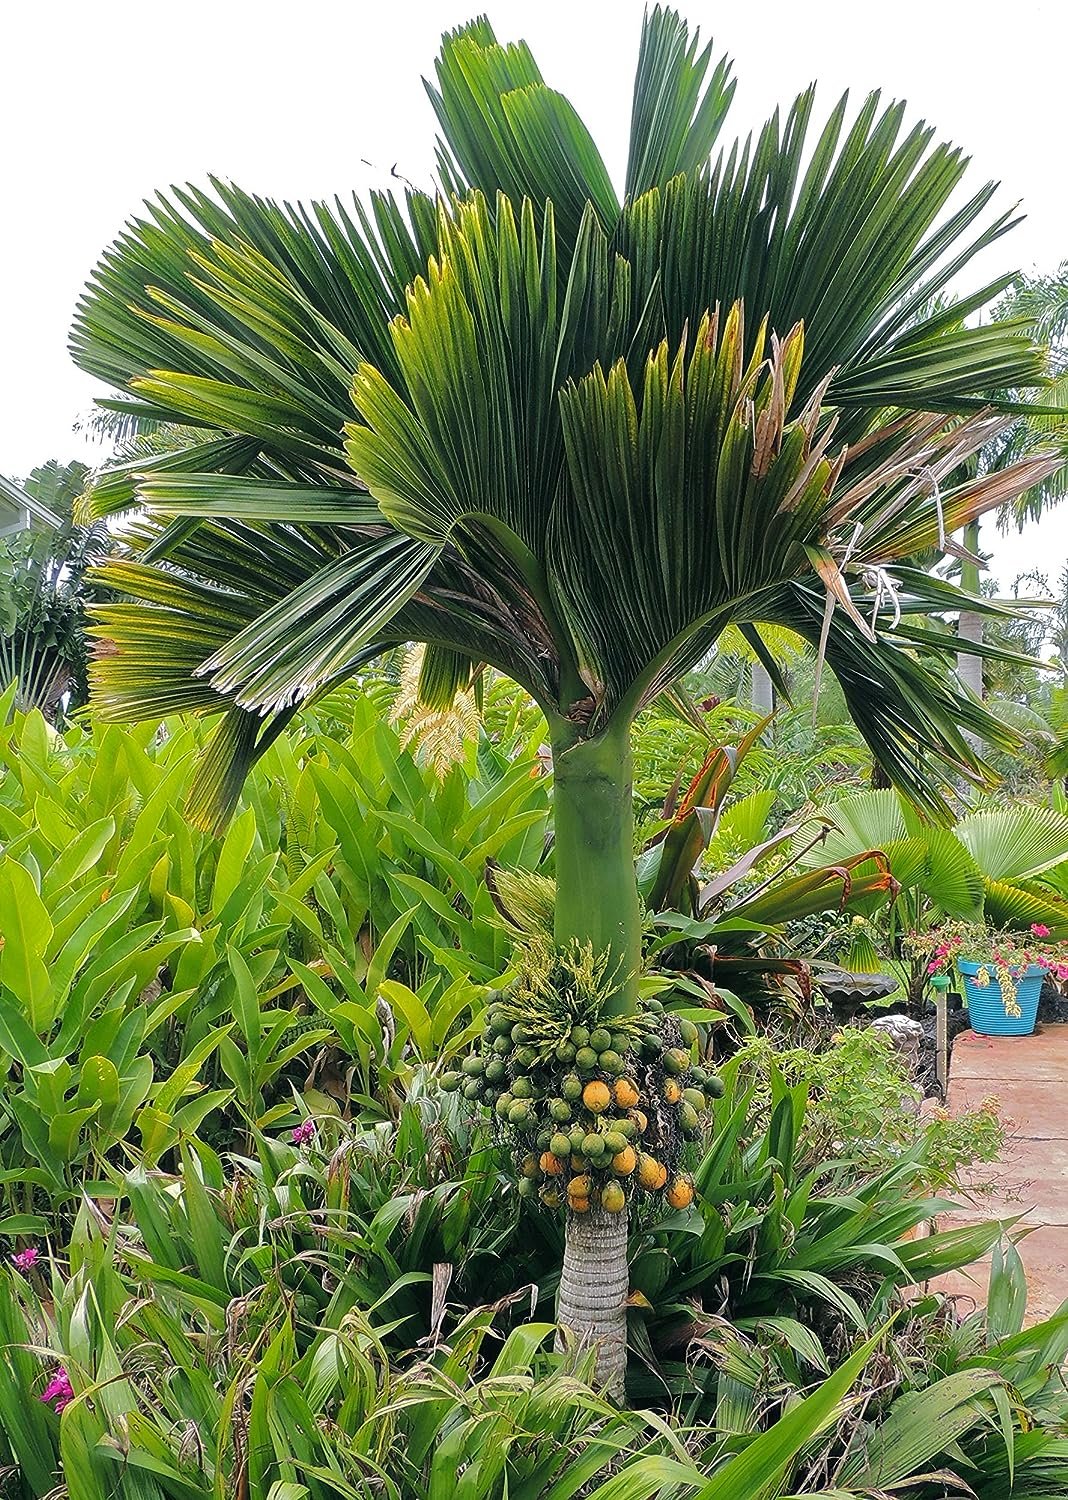 Dwarf Areca Catechu Palm - Live Plant in a 10 Inch Pot - Areca Catechu 'Dwarf' - Breathtaking Ornamental Palms from Florida for The Home and Patio - image 2 of 5